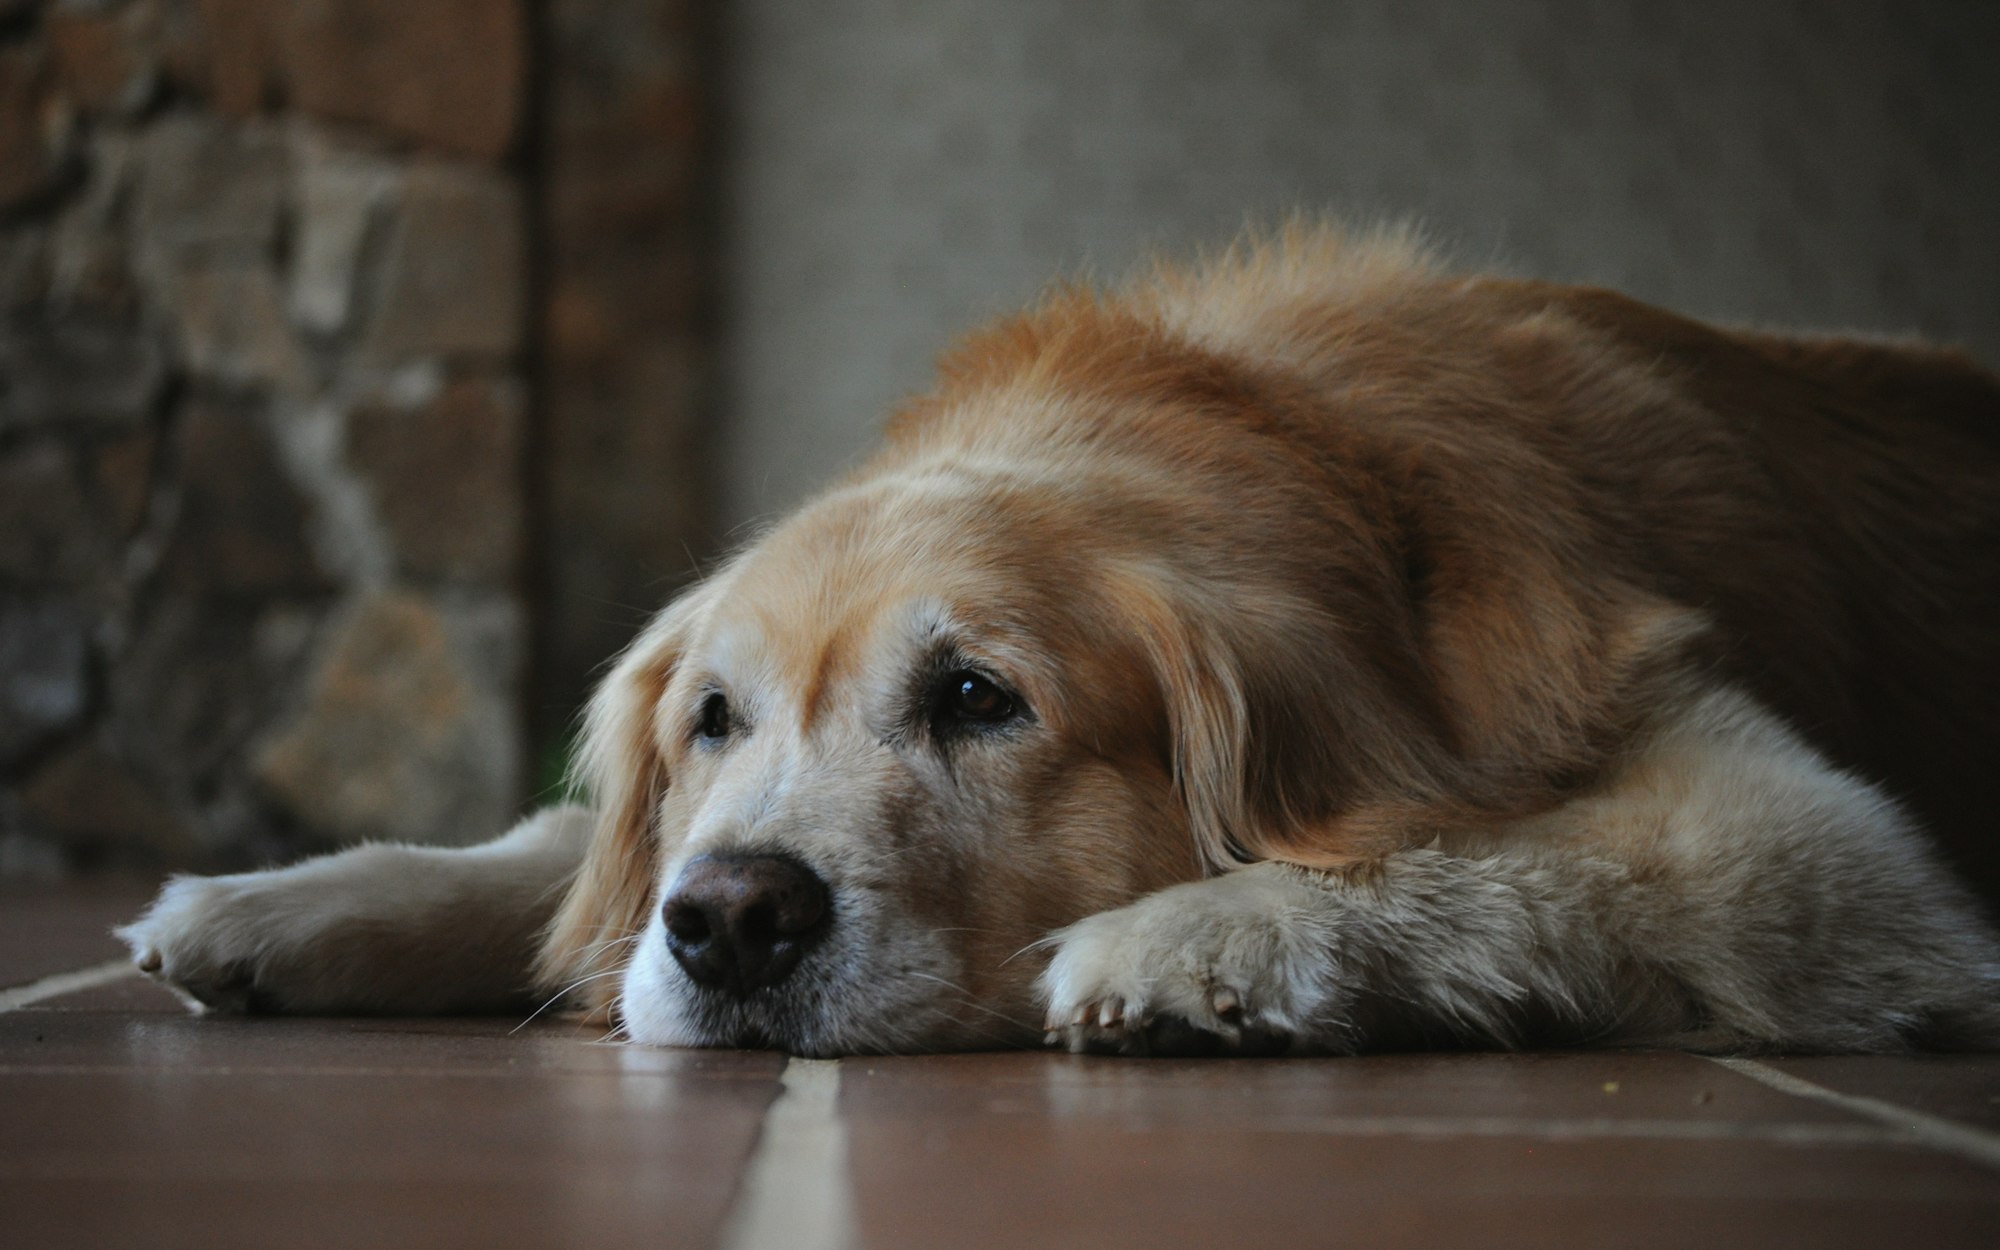 brown and white long coated older dog lying on floor